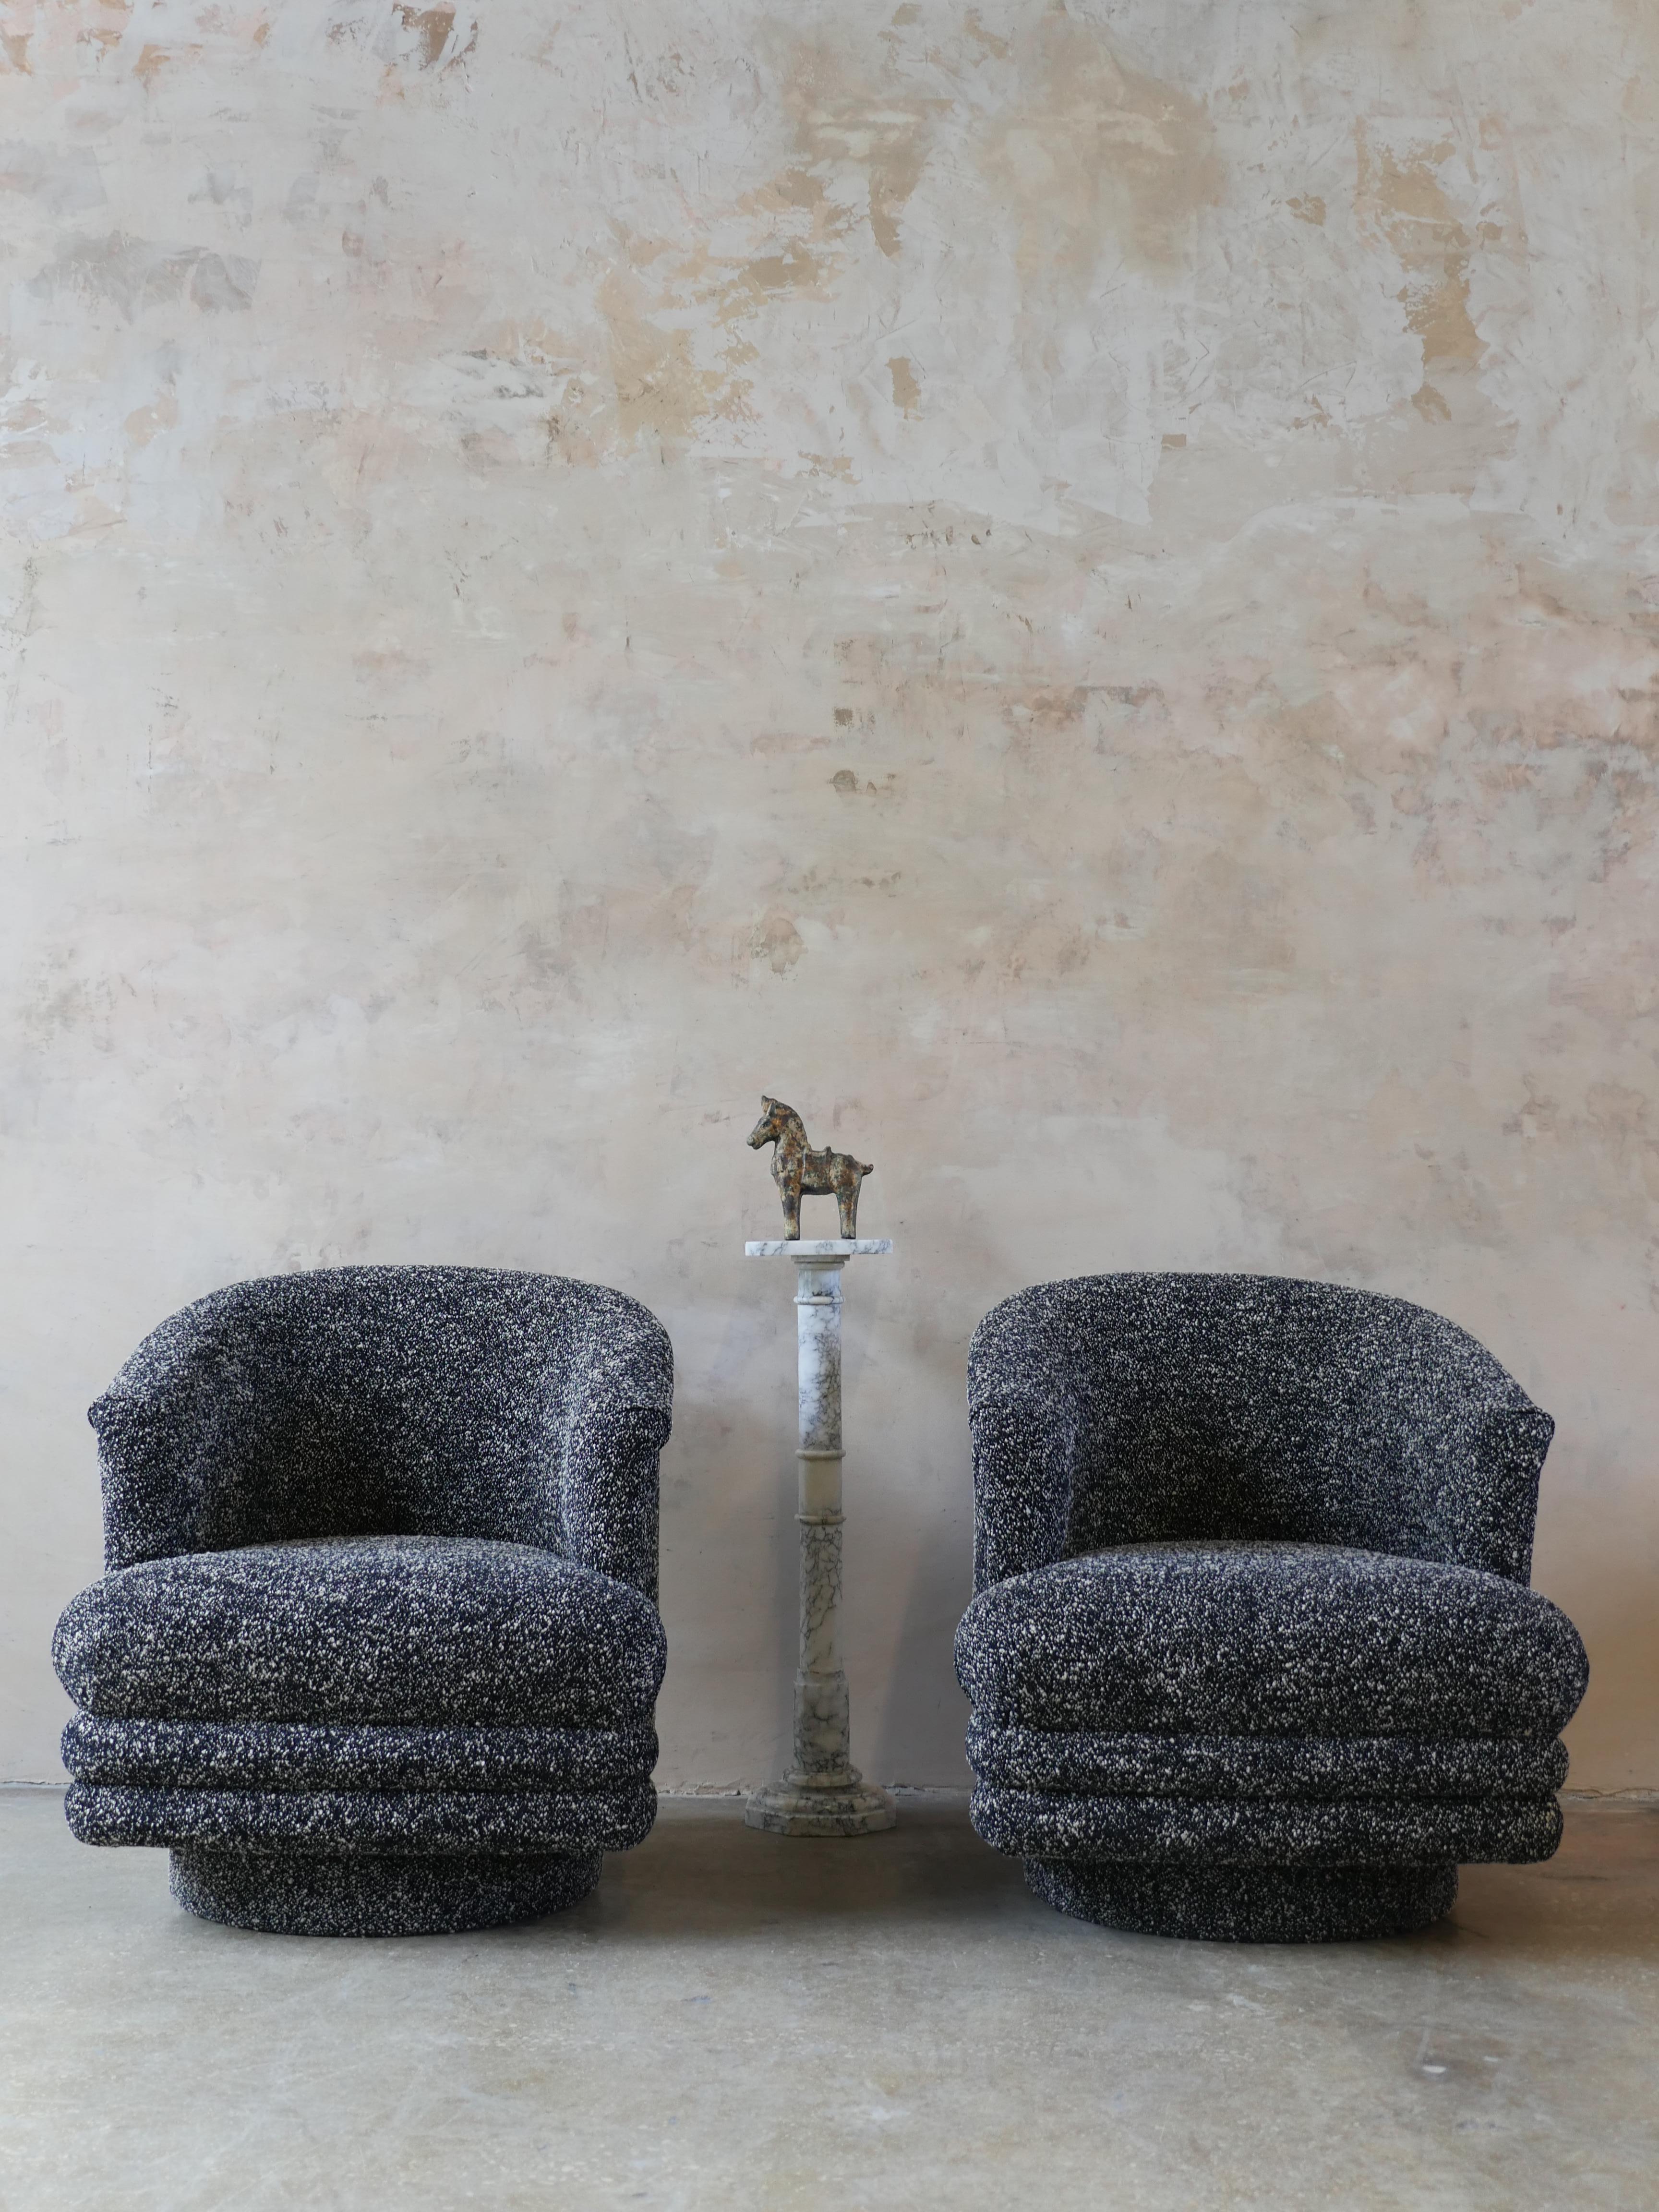 1980s Postmodern designer swivel chairs, by Directional Furniture. The chairs have been reupholstered in Kirkby Design Noir fabric, to give them a cool and luxurious look. The fabric is a super soft chenille, which is punctuated by a cream colored